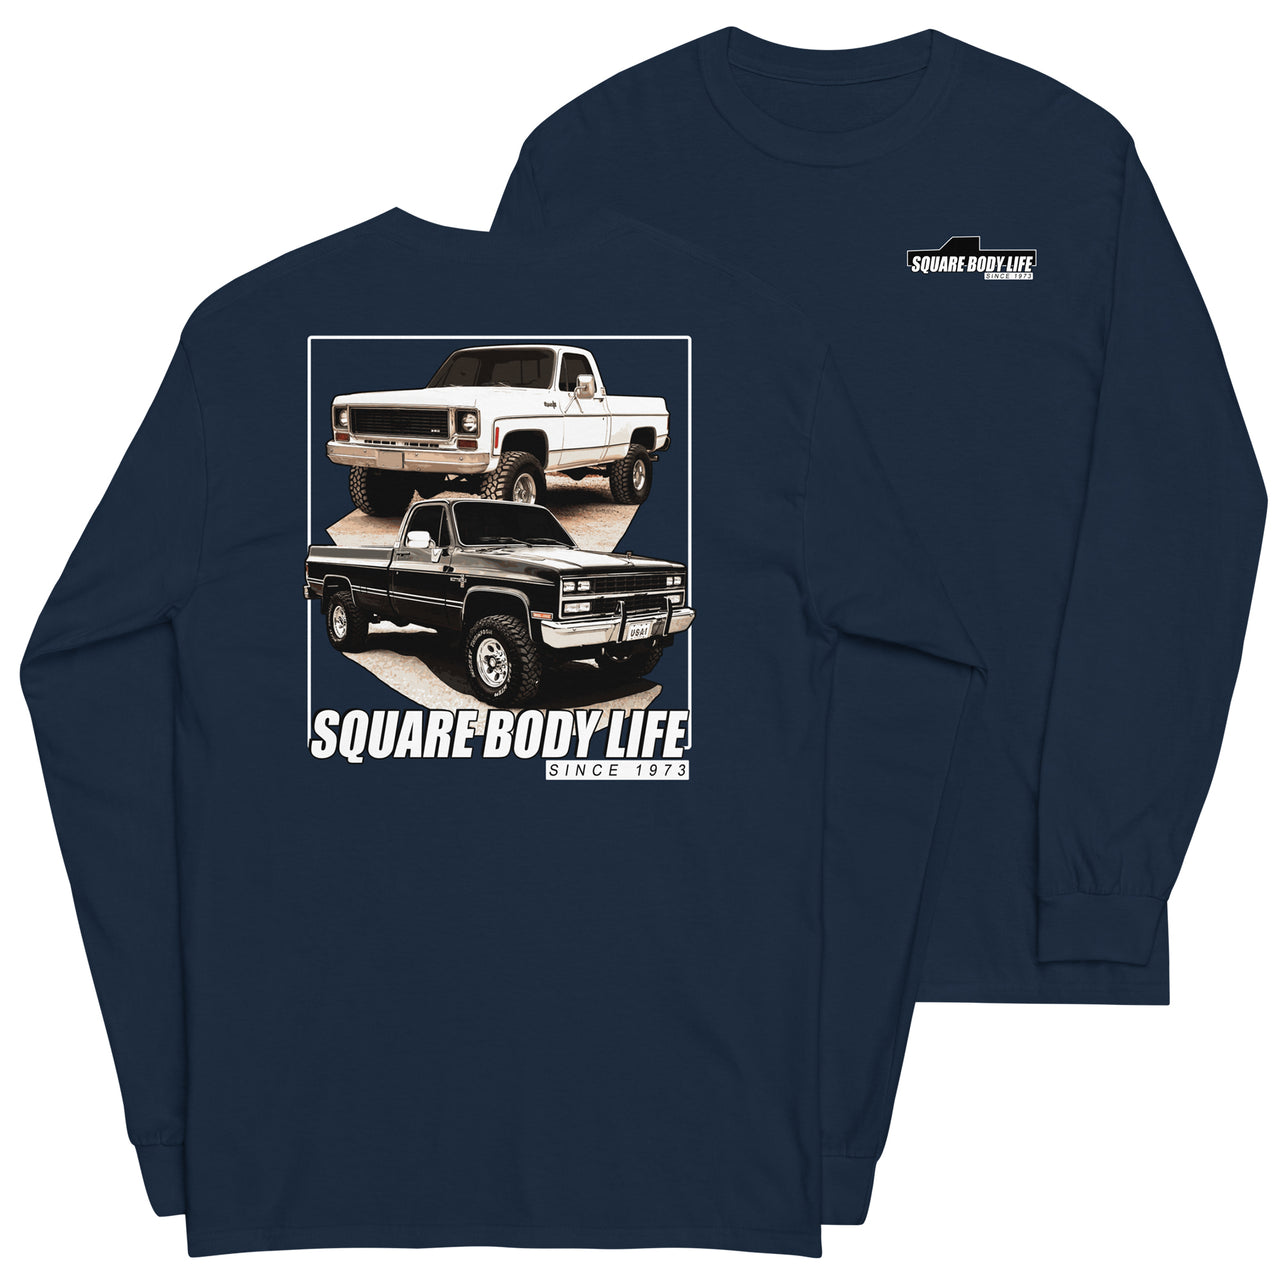 Square Body Life Long Sleeve T-Shirt in navy